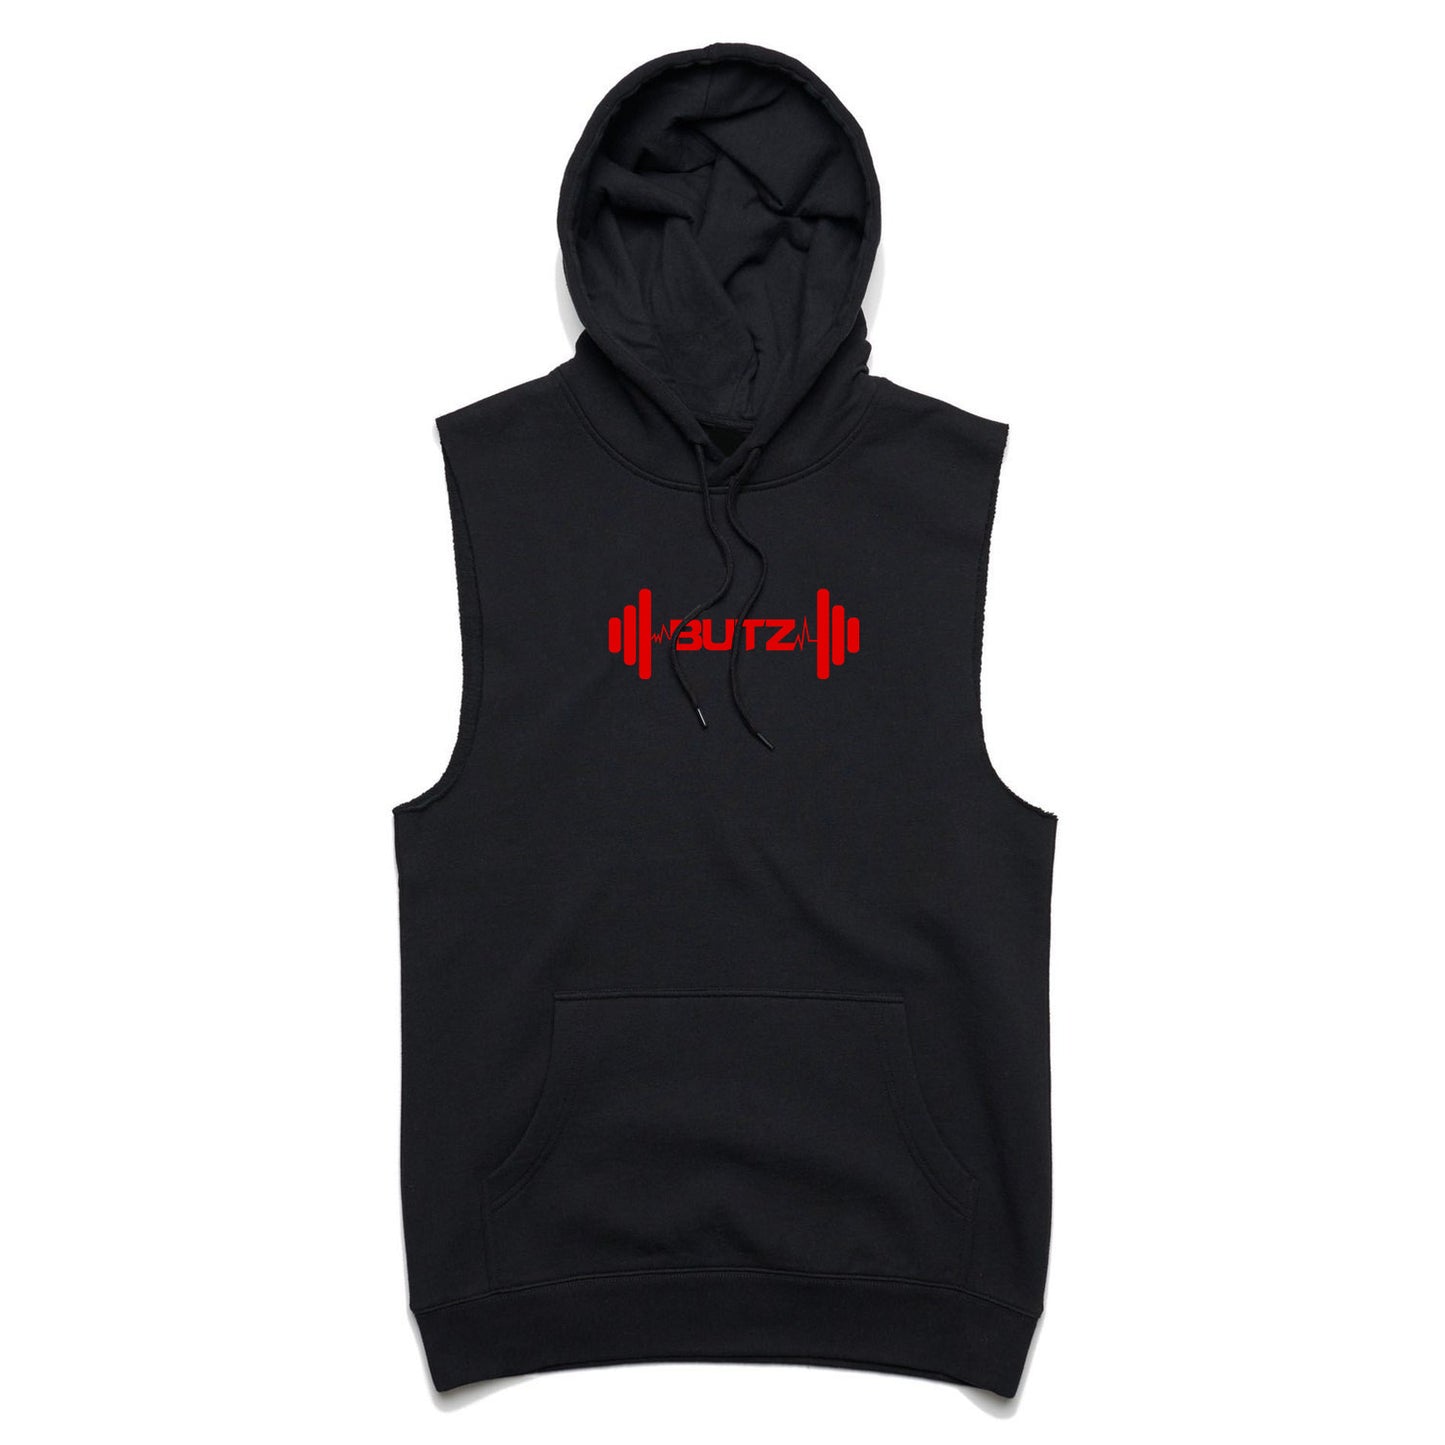 Hzori  Muscle Blank Sports Hooded Vest Men's Brothers Casual Fitness Vest Running Training Clothing